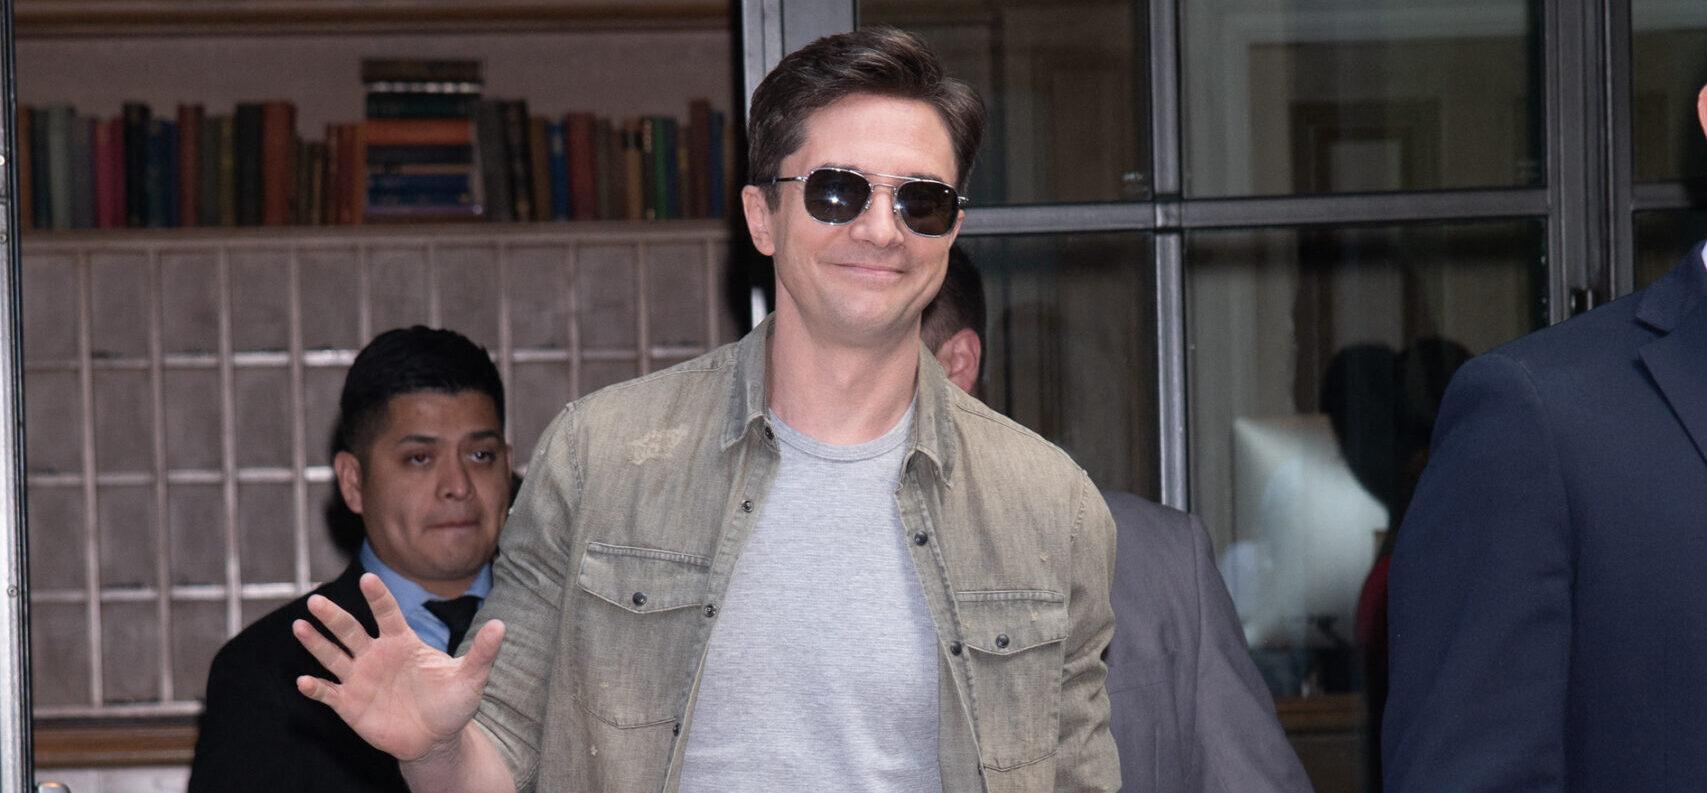 Blast Reddit Wars: Topher Grace ‘For The Win’ Not Helping Danny Masterson